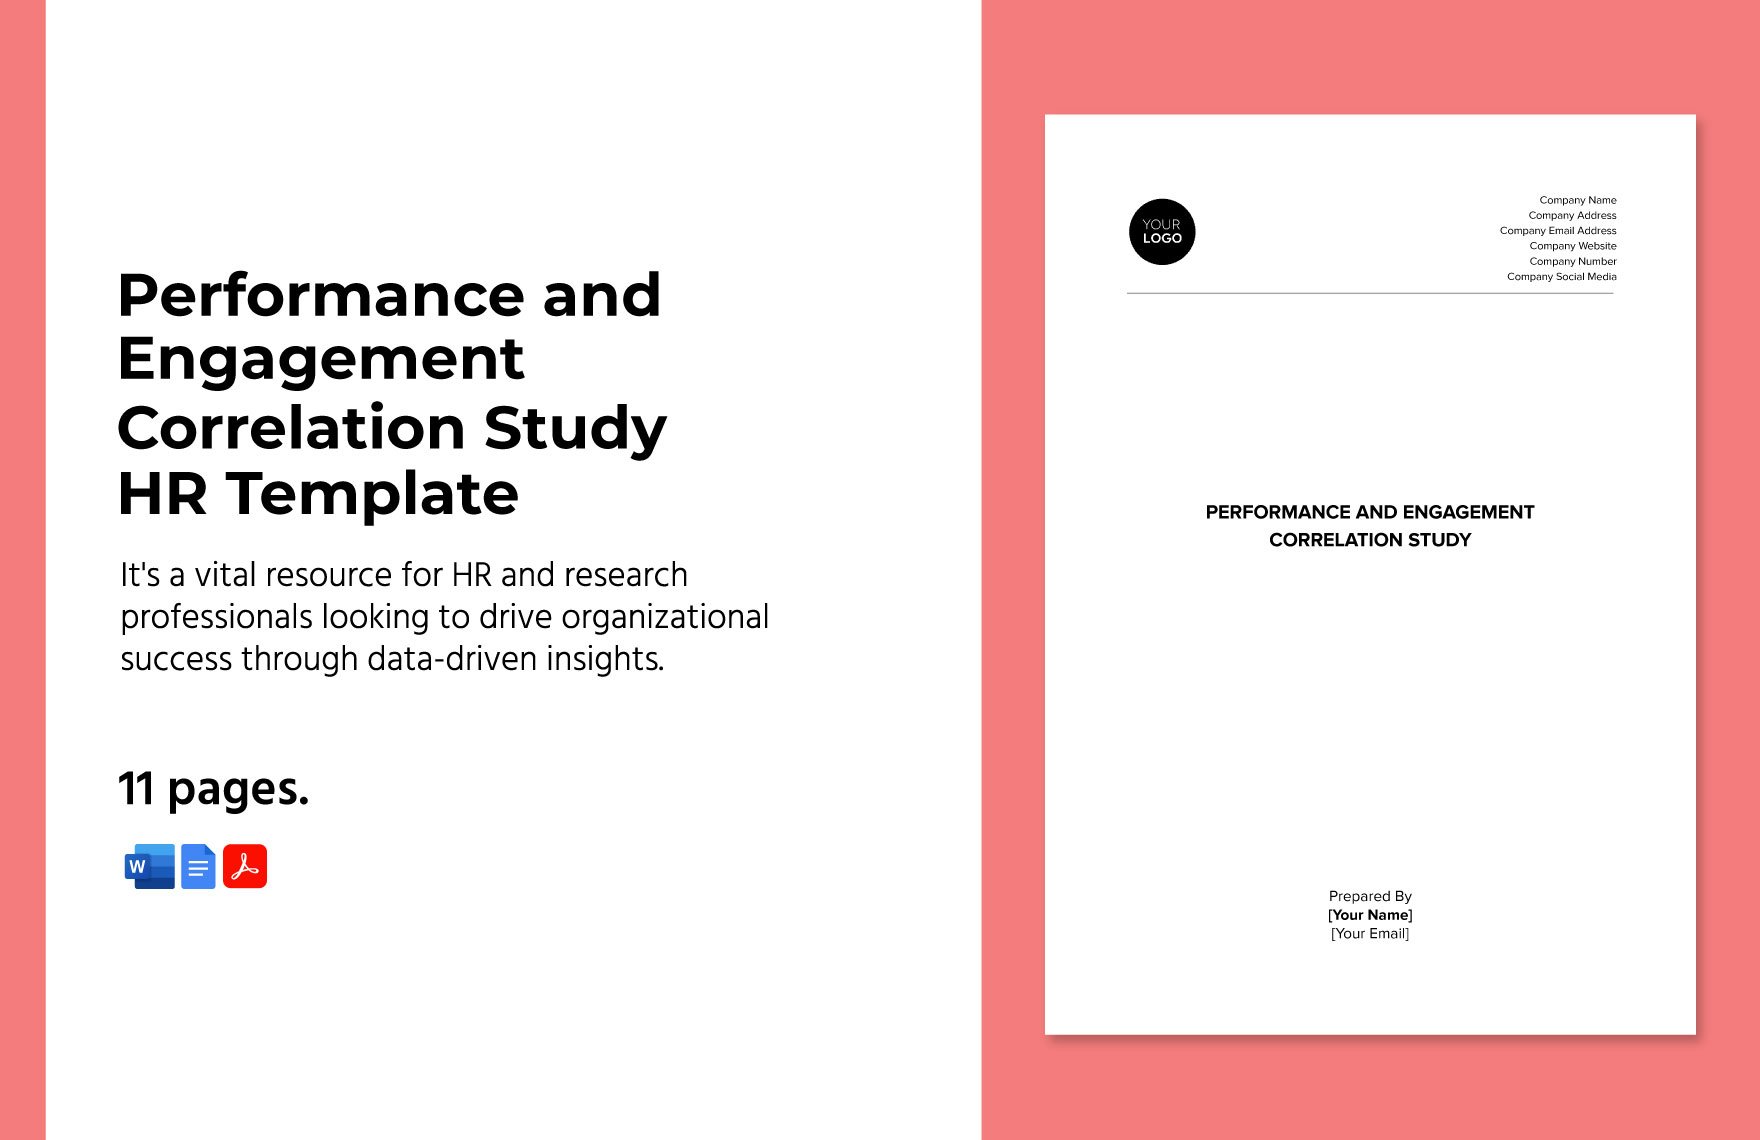 Performance and Engagement Correlation Study HR Template